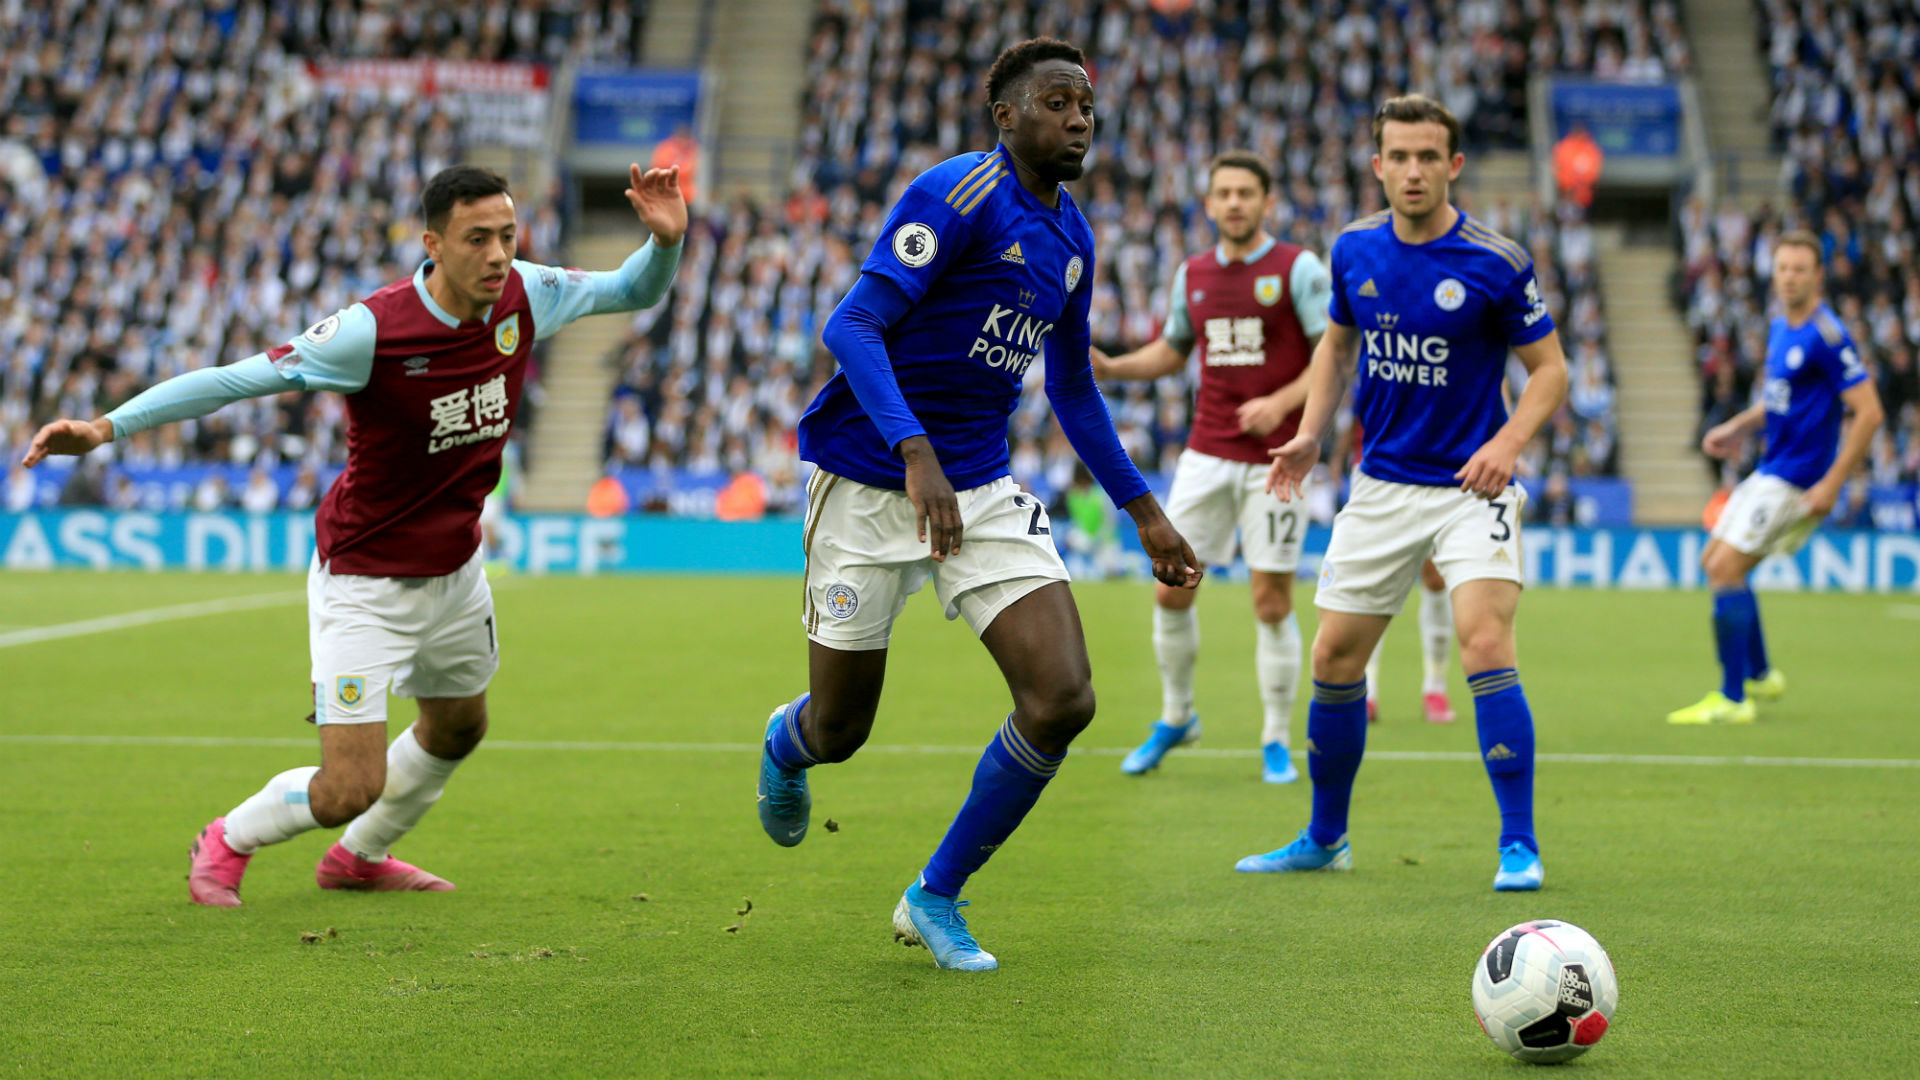 Leicester City’s Ndidi the best holding midfielder in Premier League – Maddison